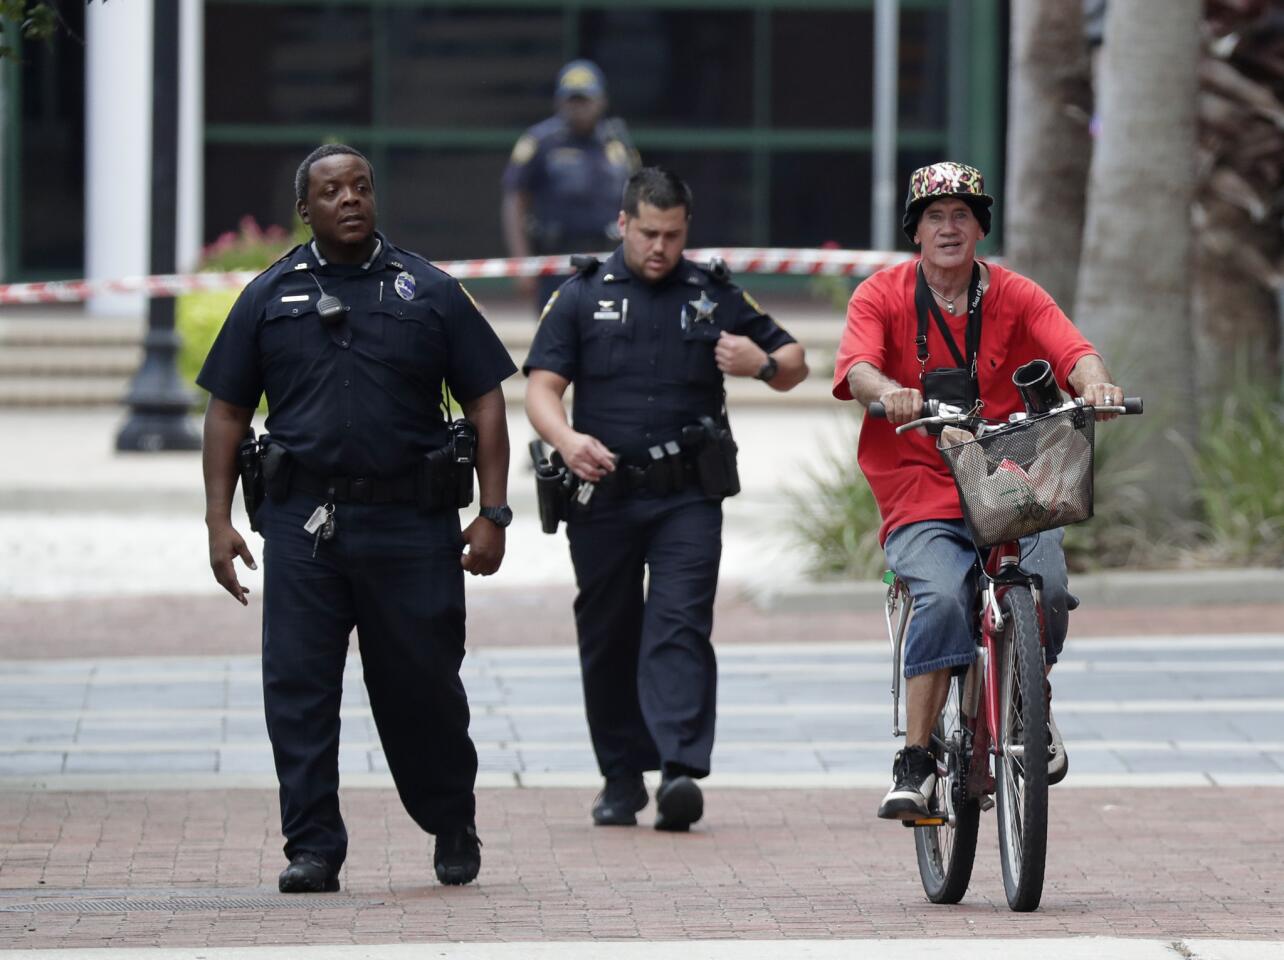 Police officers escort a bicyclist away from the scene of Sunday's shooting at the Jacksonville Landing, a riverfront mall in Jacksonville, Fla.